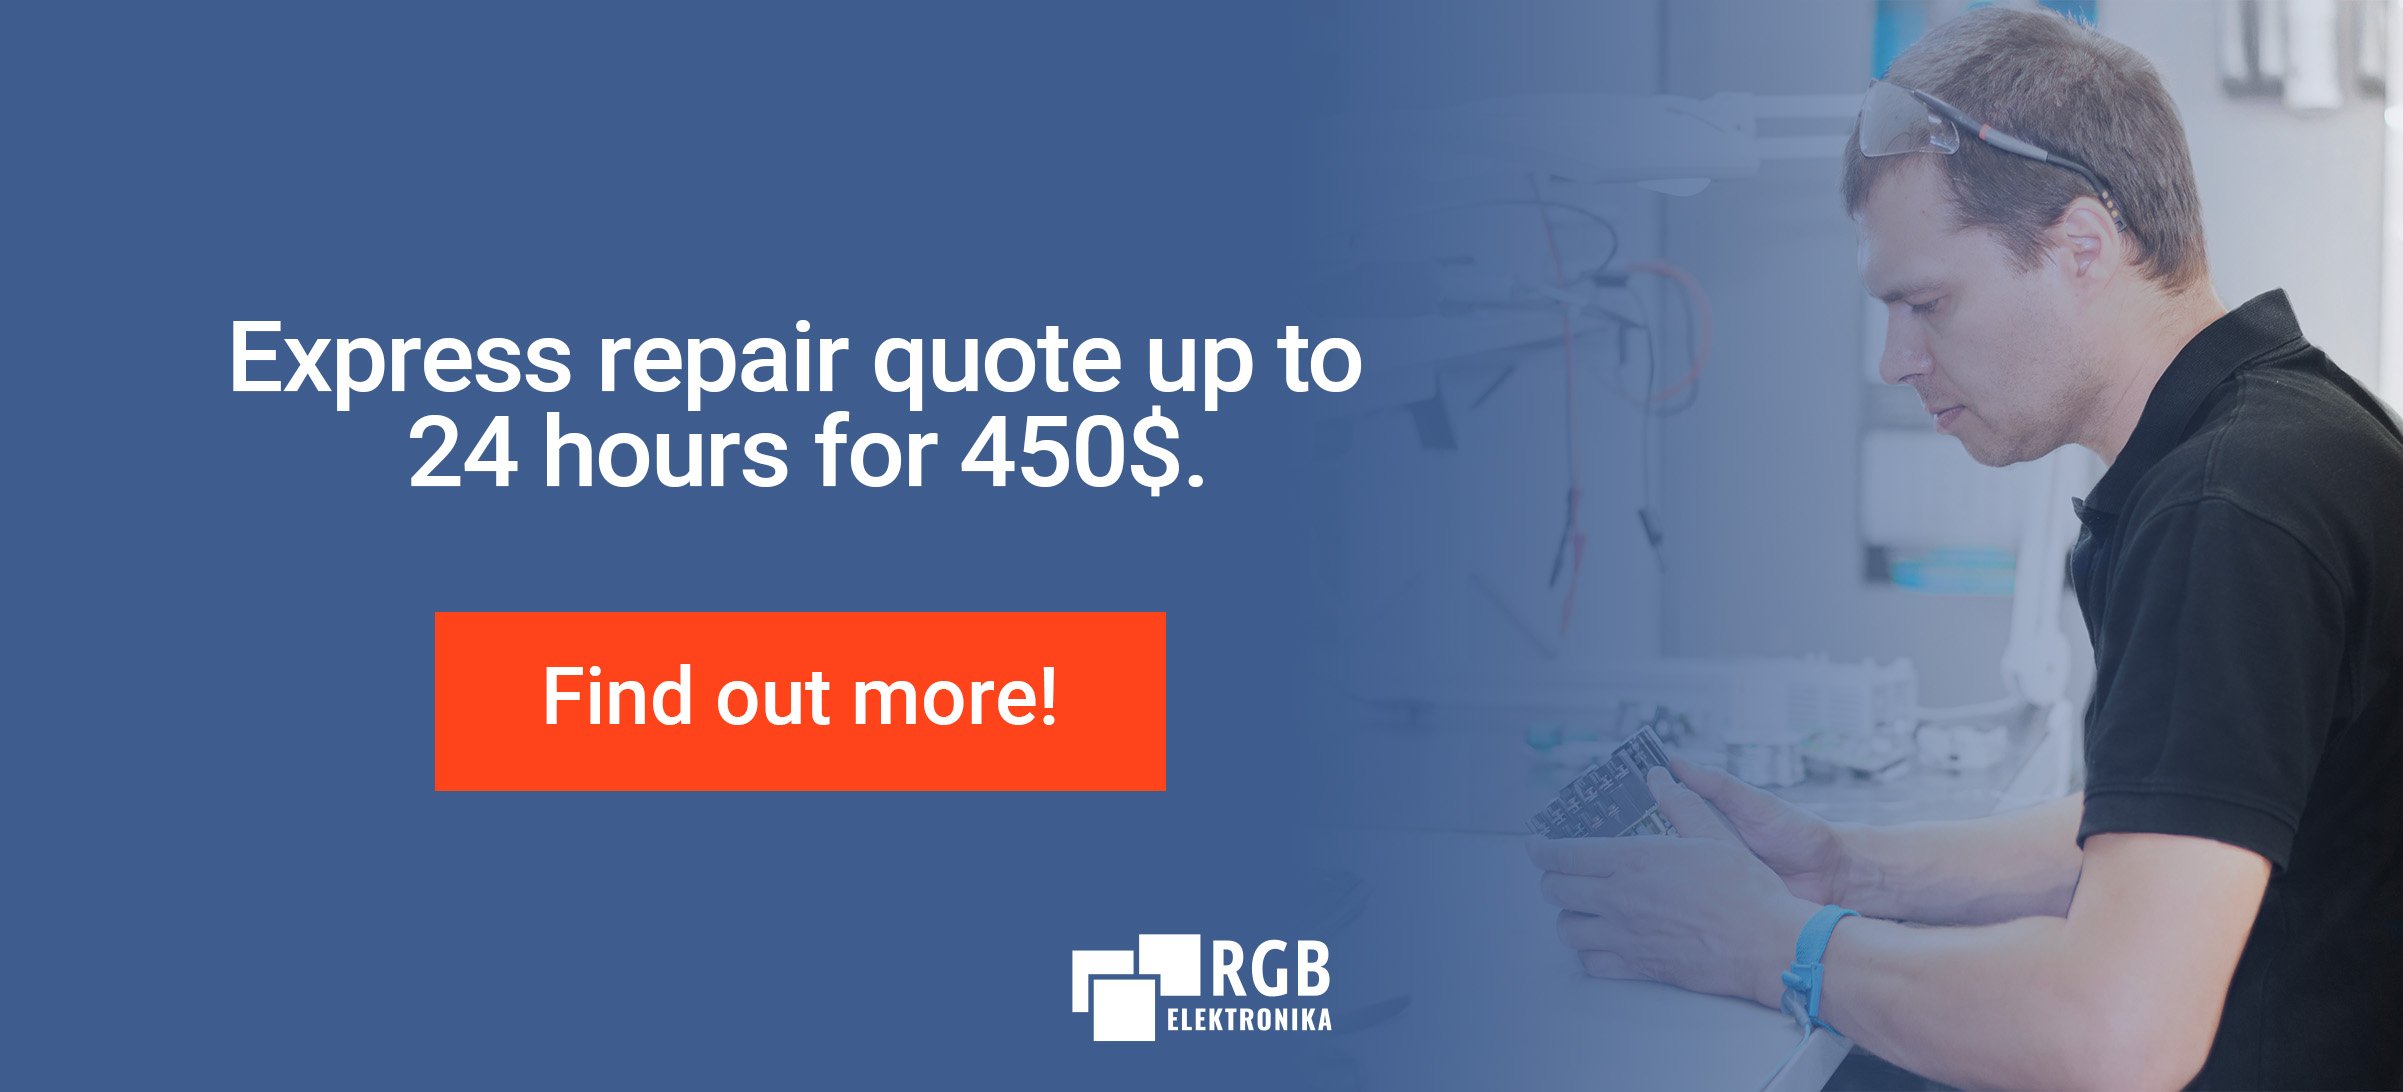 Express repair quote up to 24 hours for £450 net. Find out more!